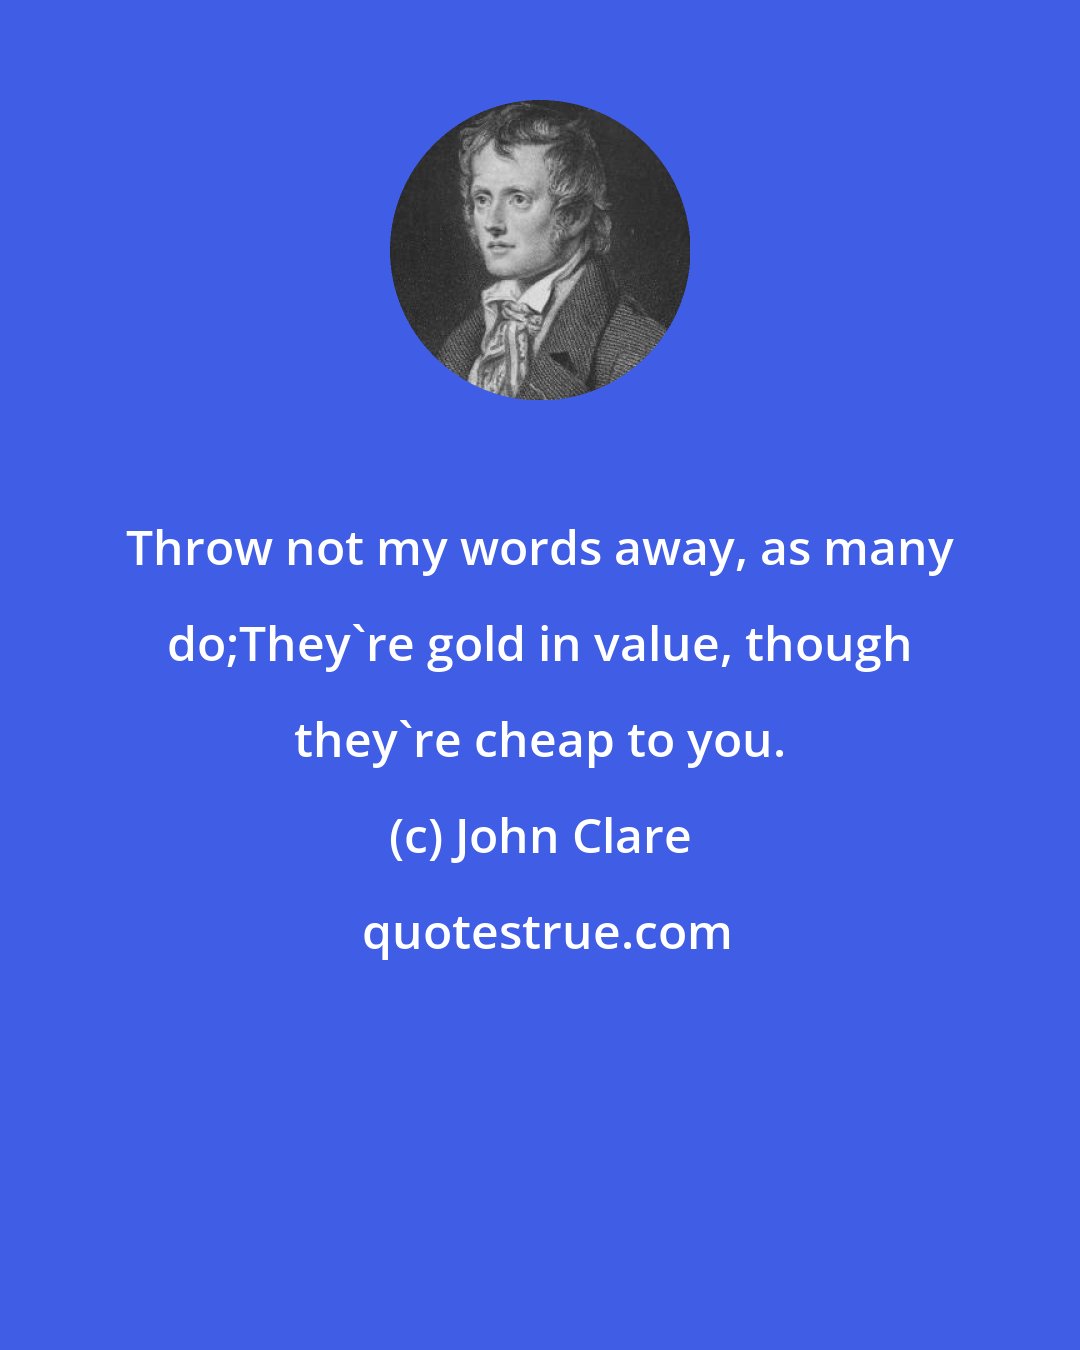 John Clare: Throw not my words away, as many do;They're gold in value, though they're cheap to you.